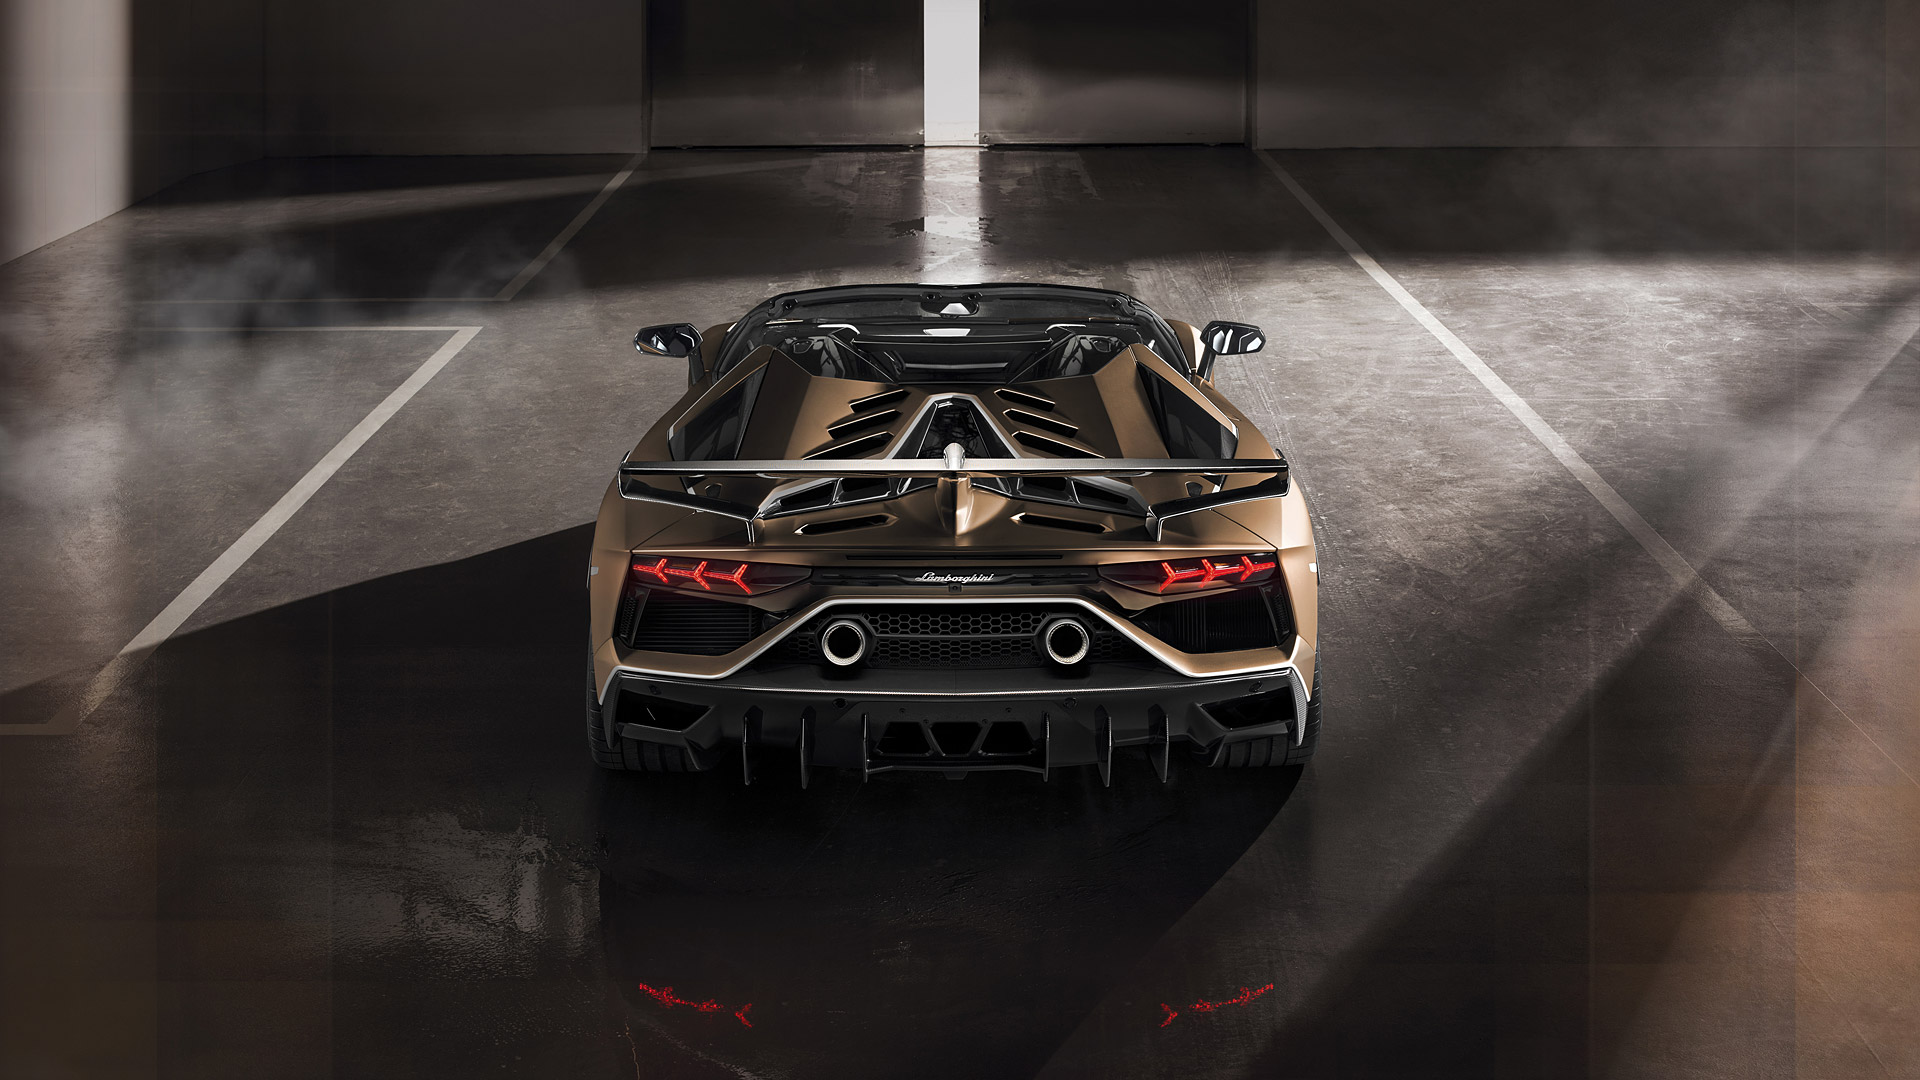 Save Your Wallpaper To View Full Size - Lamborghini Aventador Svj Roadster , HD Wallpaper & Backgrounds